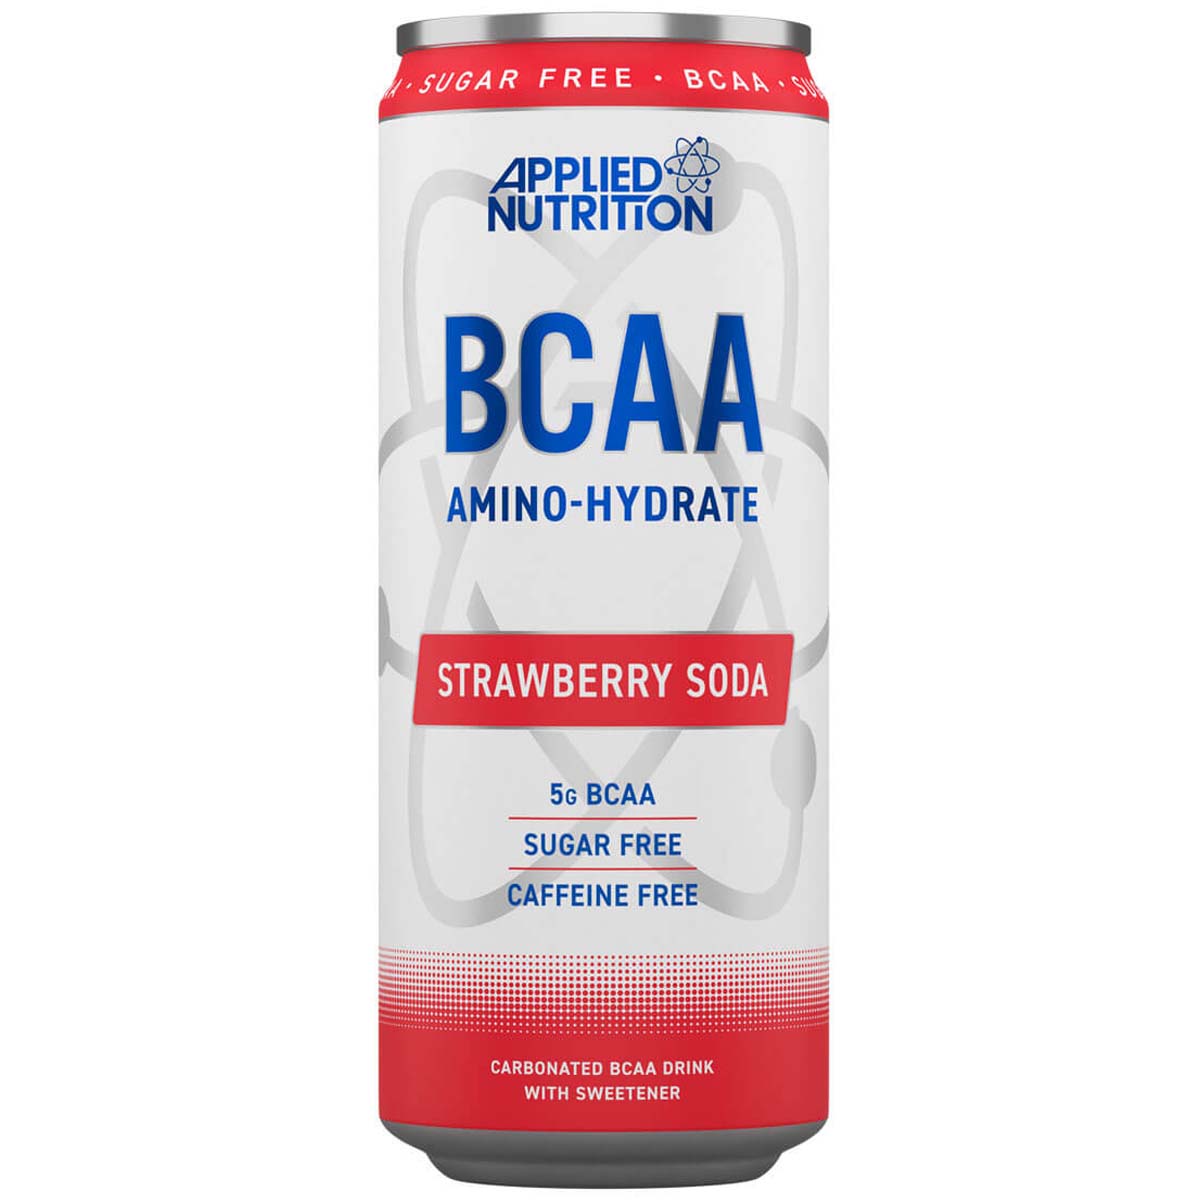 Applied Nutrition BCAA Amino Hydrate Can, Strawberry Soda, 1 Piece